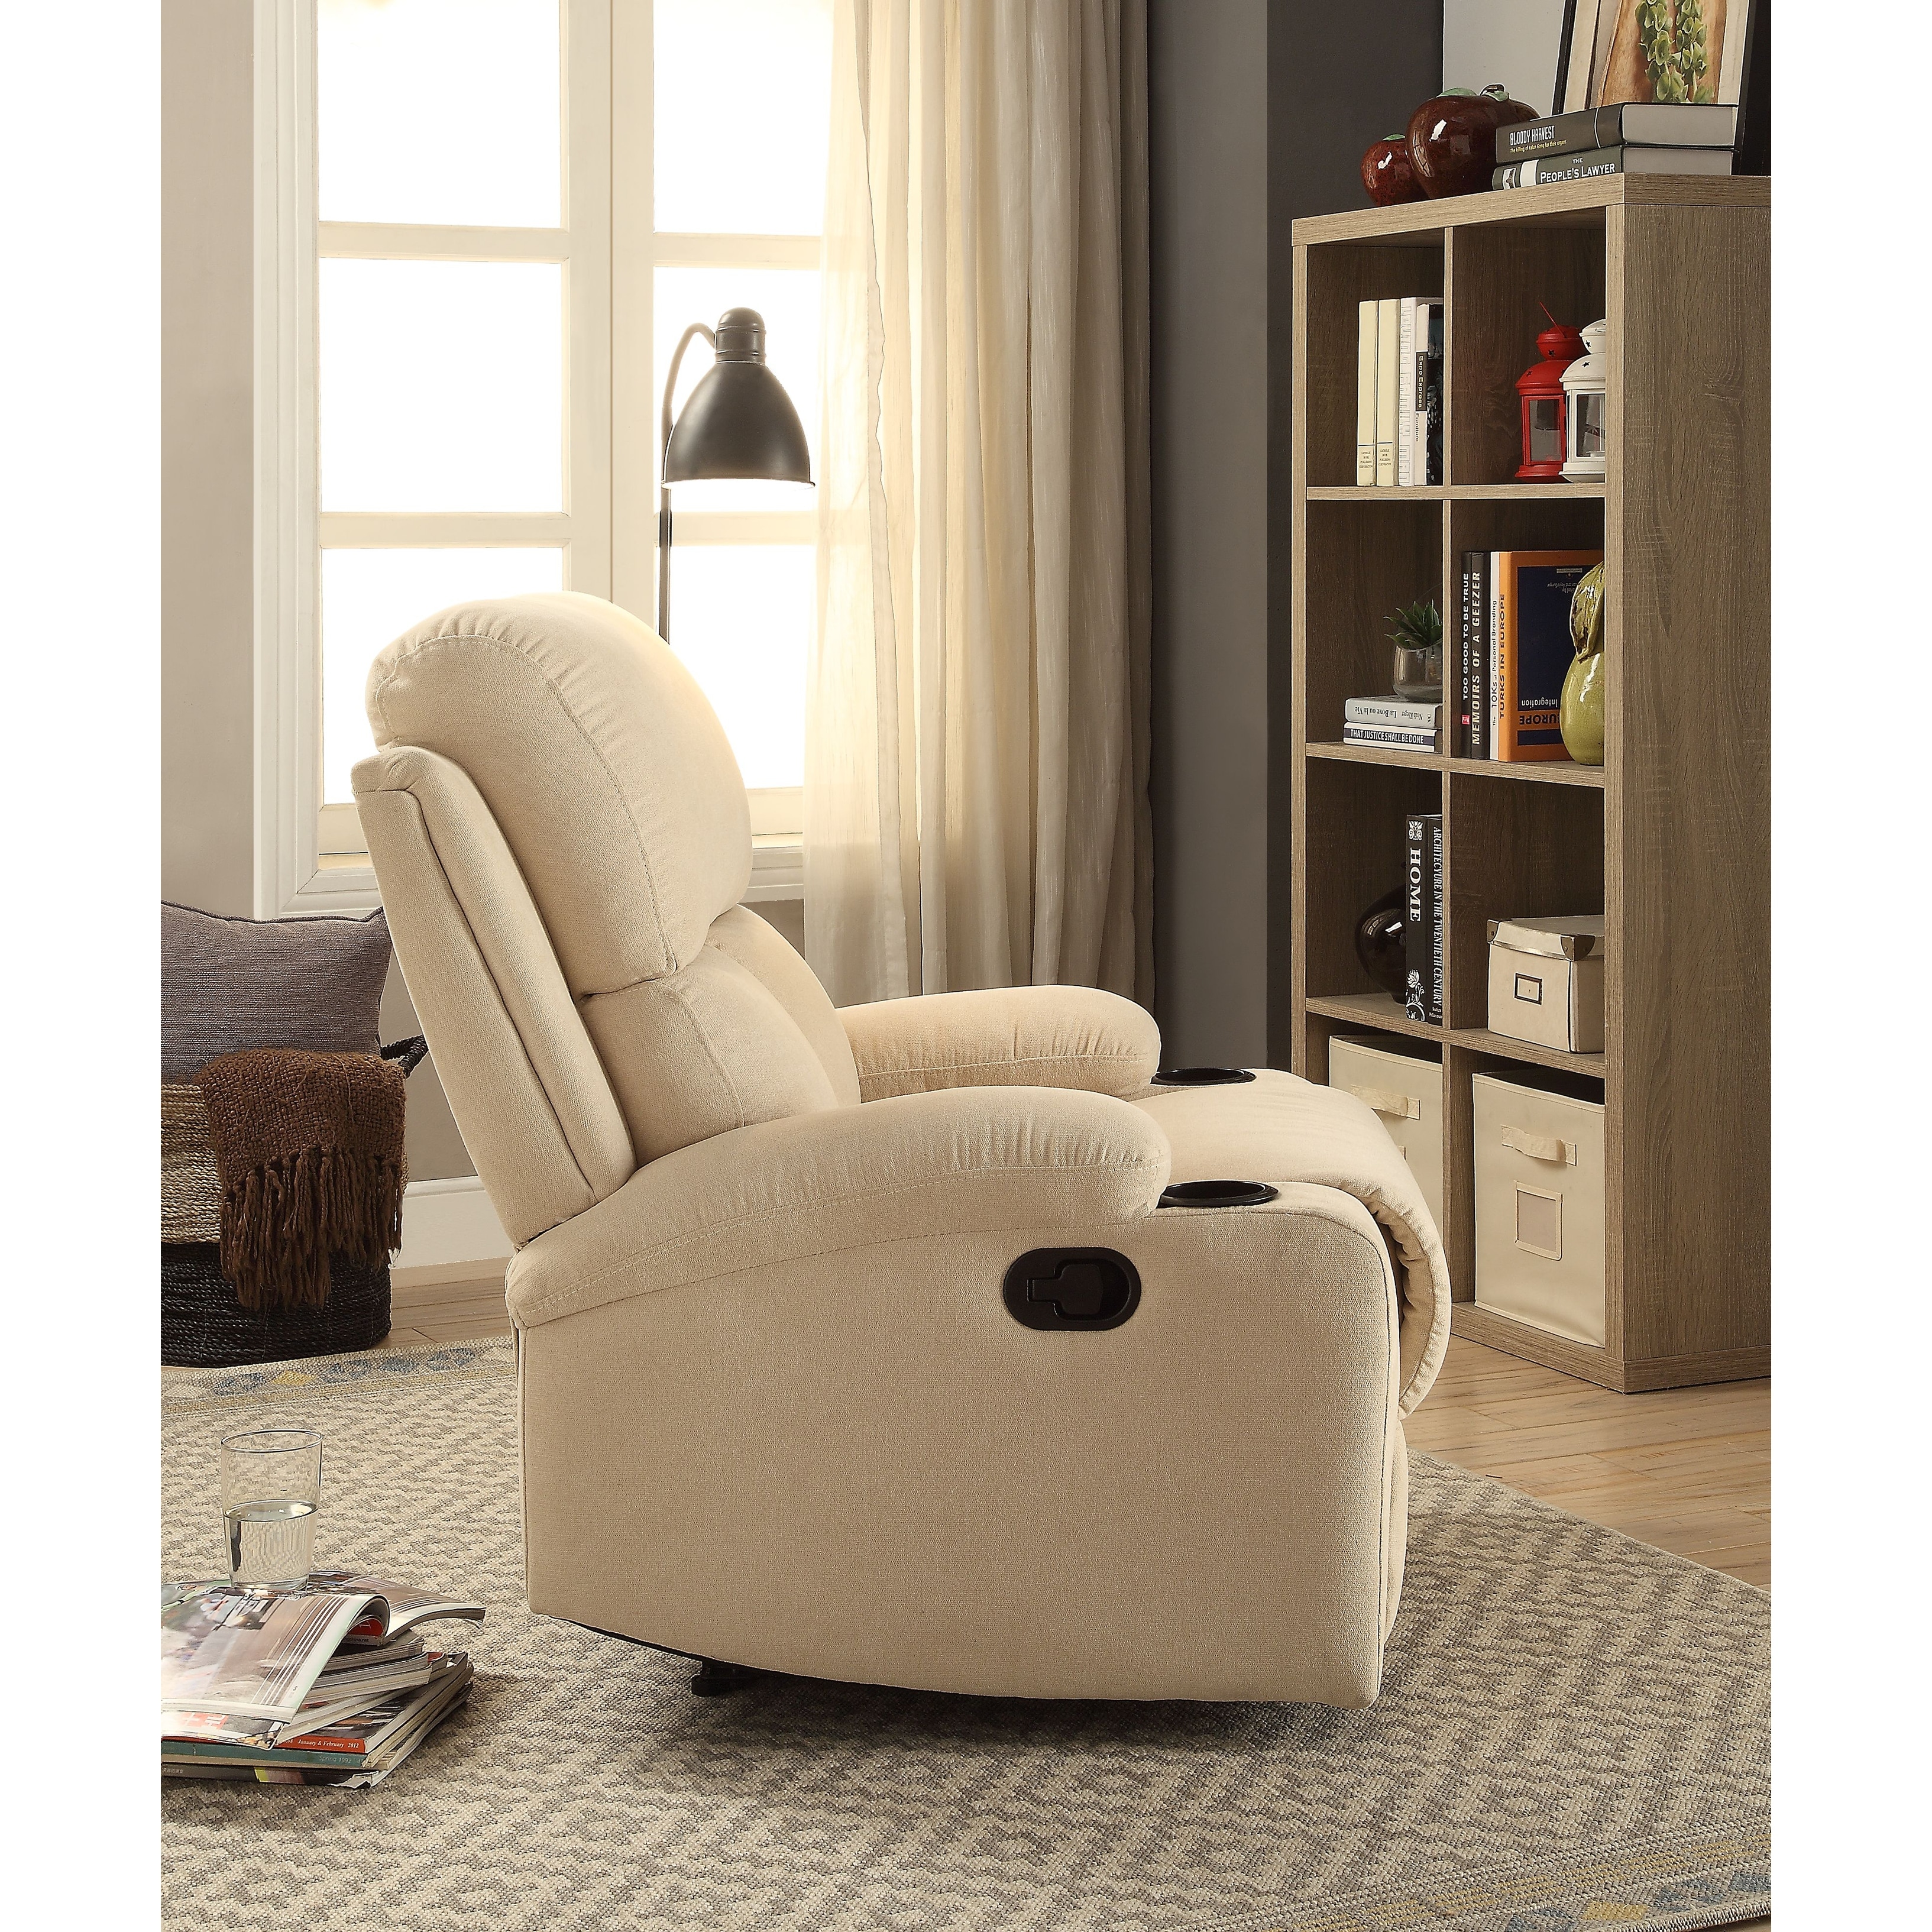 https://ak1.ostkcdn.com/images/products/is/images/direct/1e2123adf39661cb70029cb80d63ed05d4a63c30/Beige-Vintage-Motion-Recliner-with-Tight-Back-%26-Seat-Cushions-and-Pillow-Top-Arm-%26-Cup-Holder.jpg